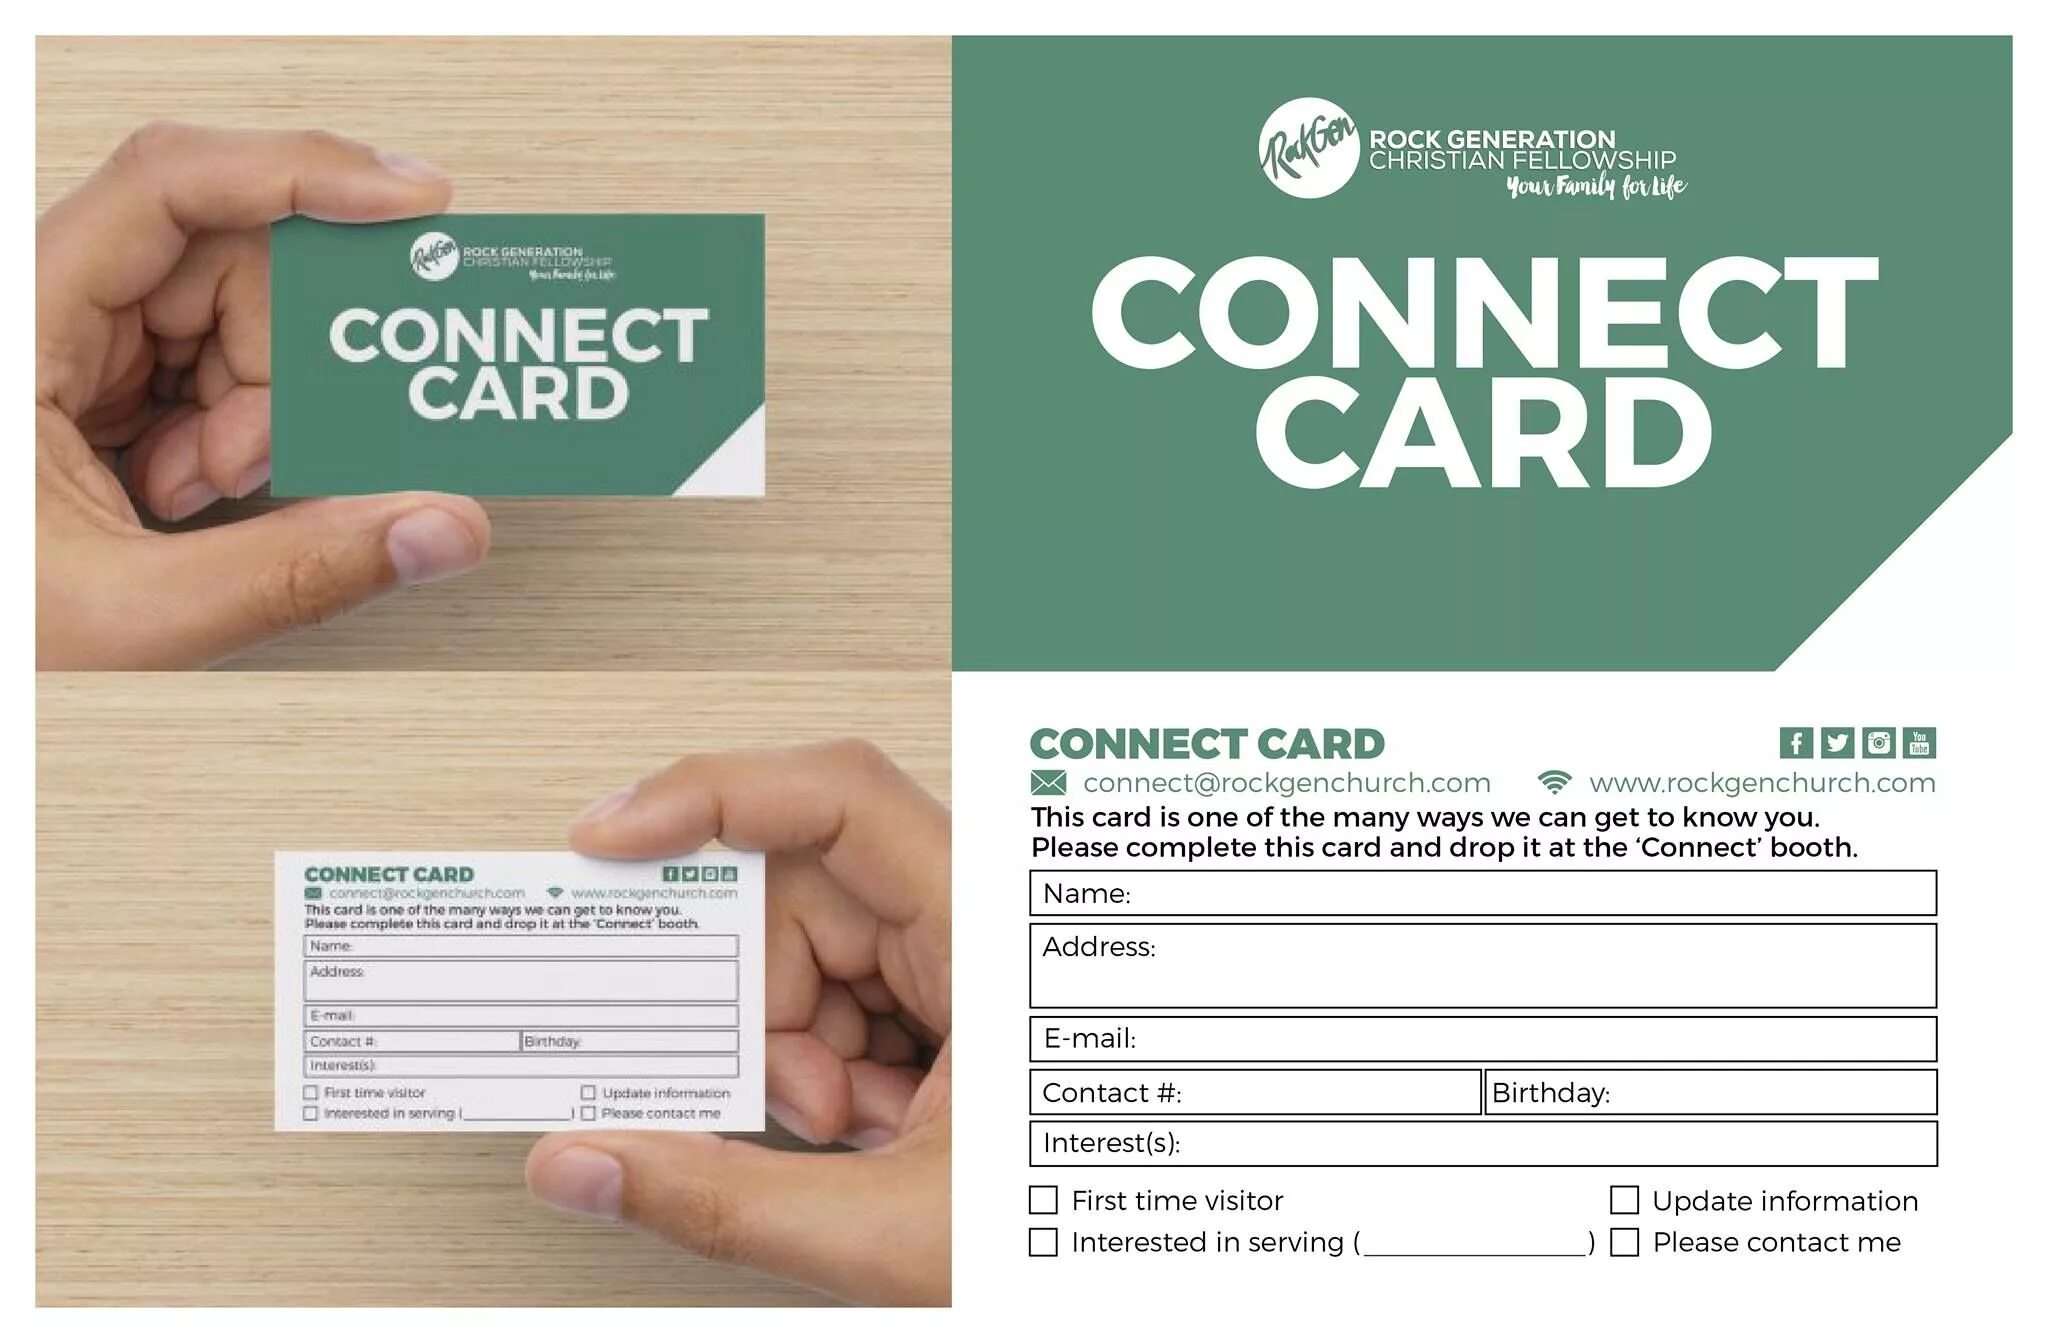 Dilap connection Card. Templates for Visitor Card. Media Team Church. Media Card examples. Connect карта